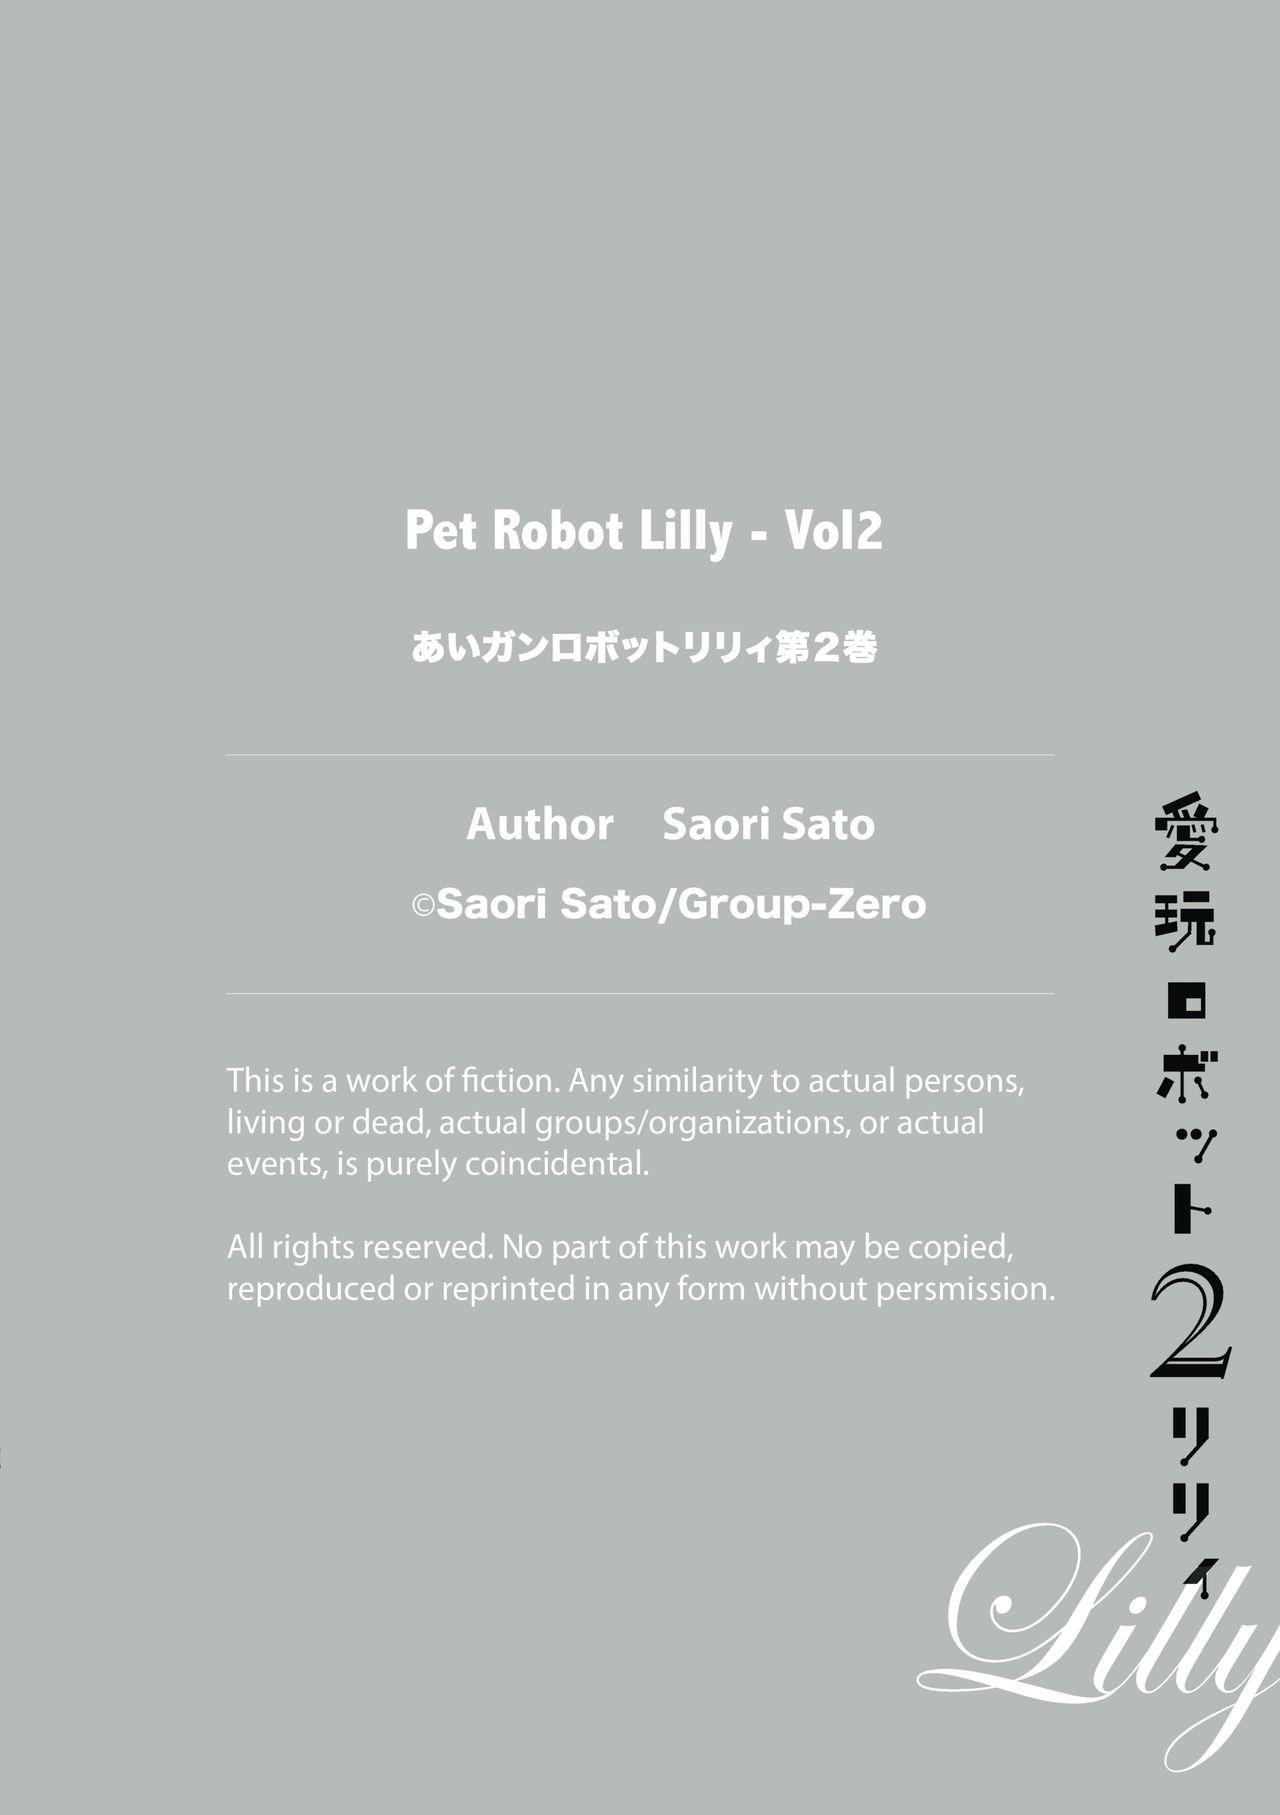 Amateur Aigan Robot Lilly - Pet Robot Lilly Vol. 2 Penis - Page 152